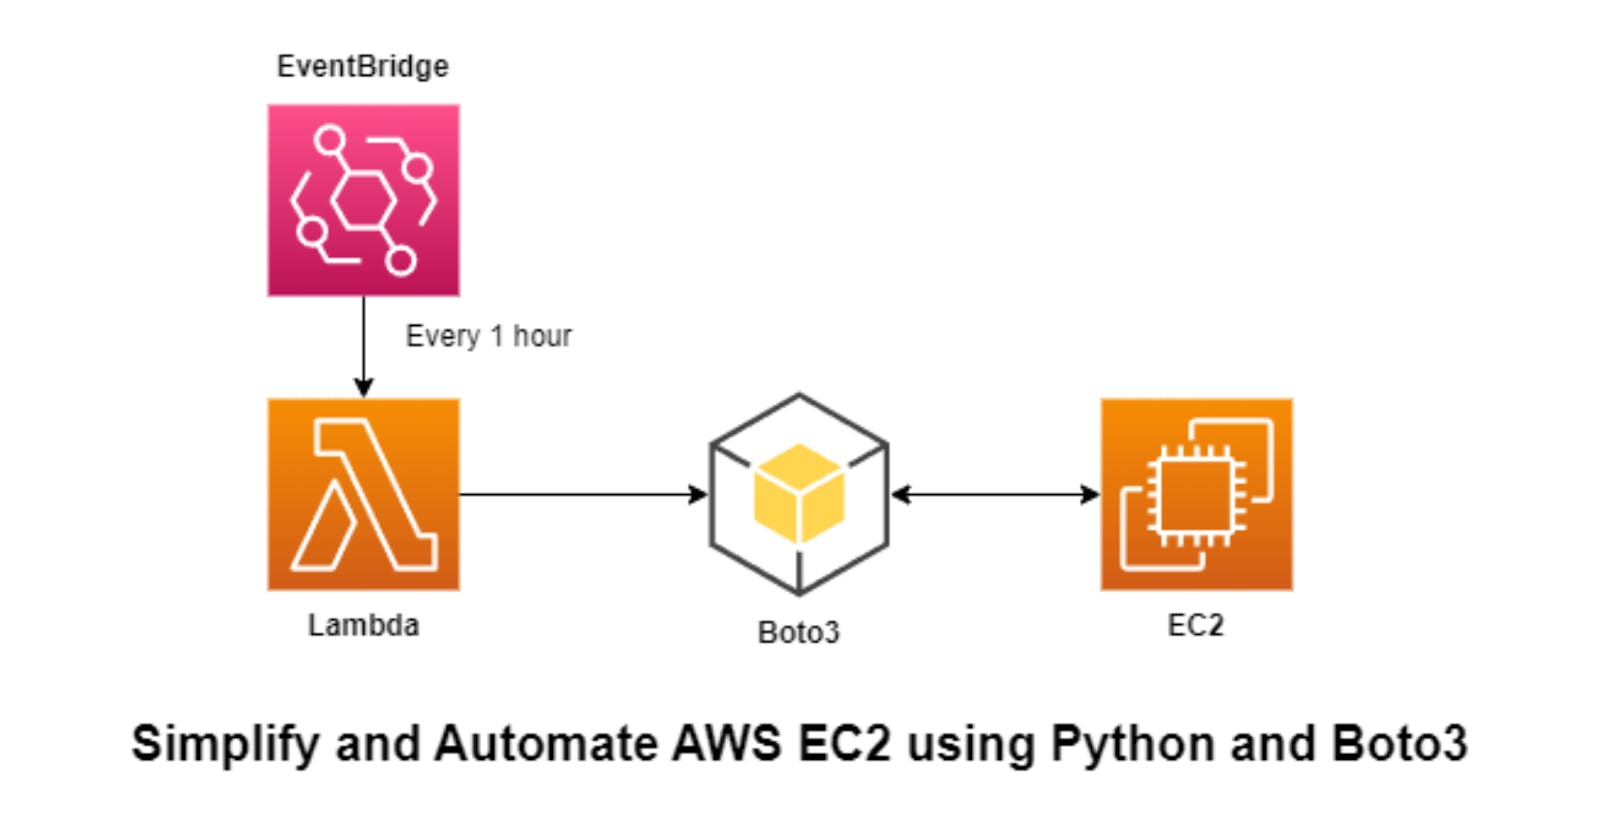 Simplify and Automate AWS EC2 Management using Python and Boto3